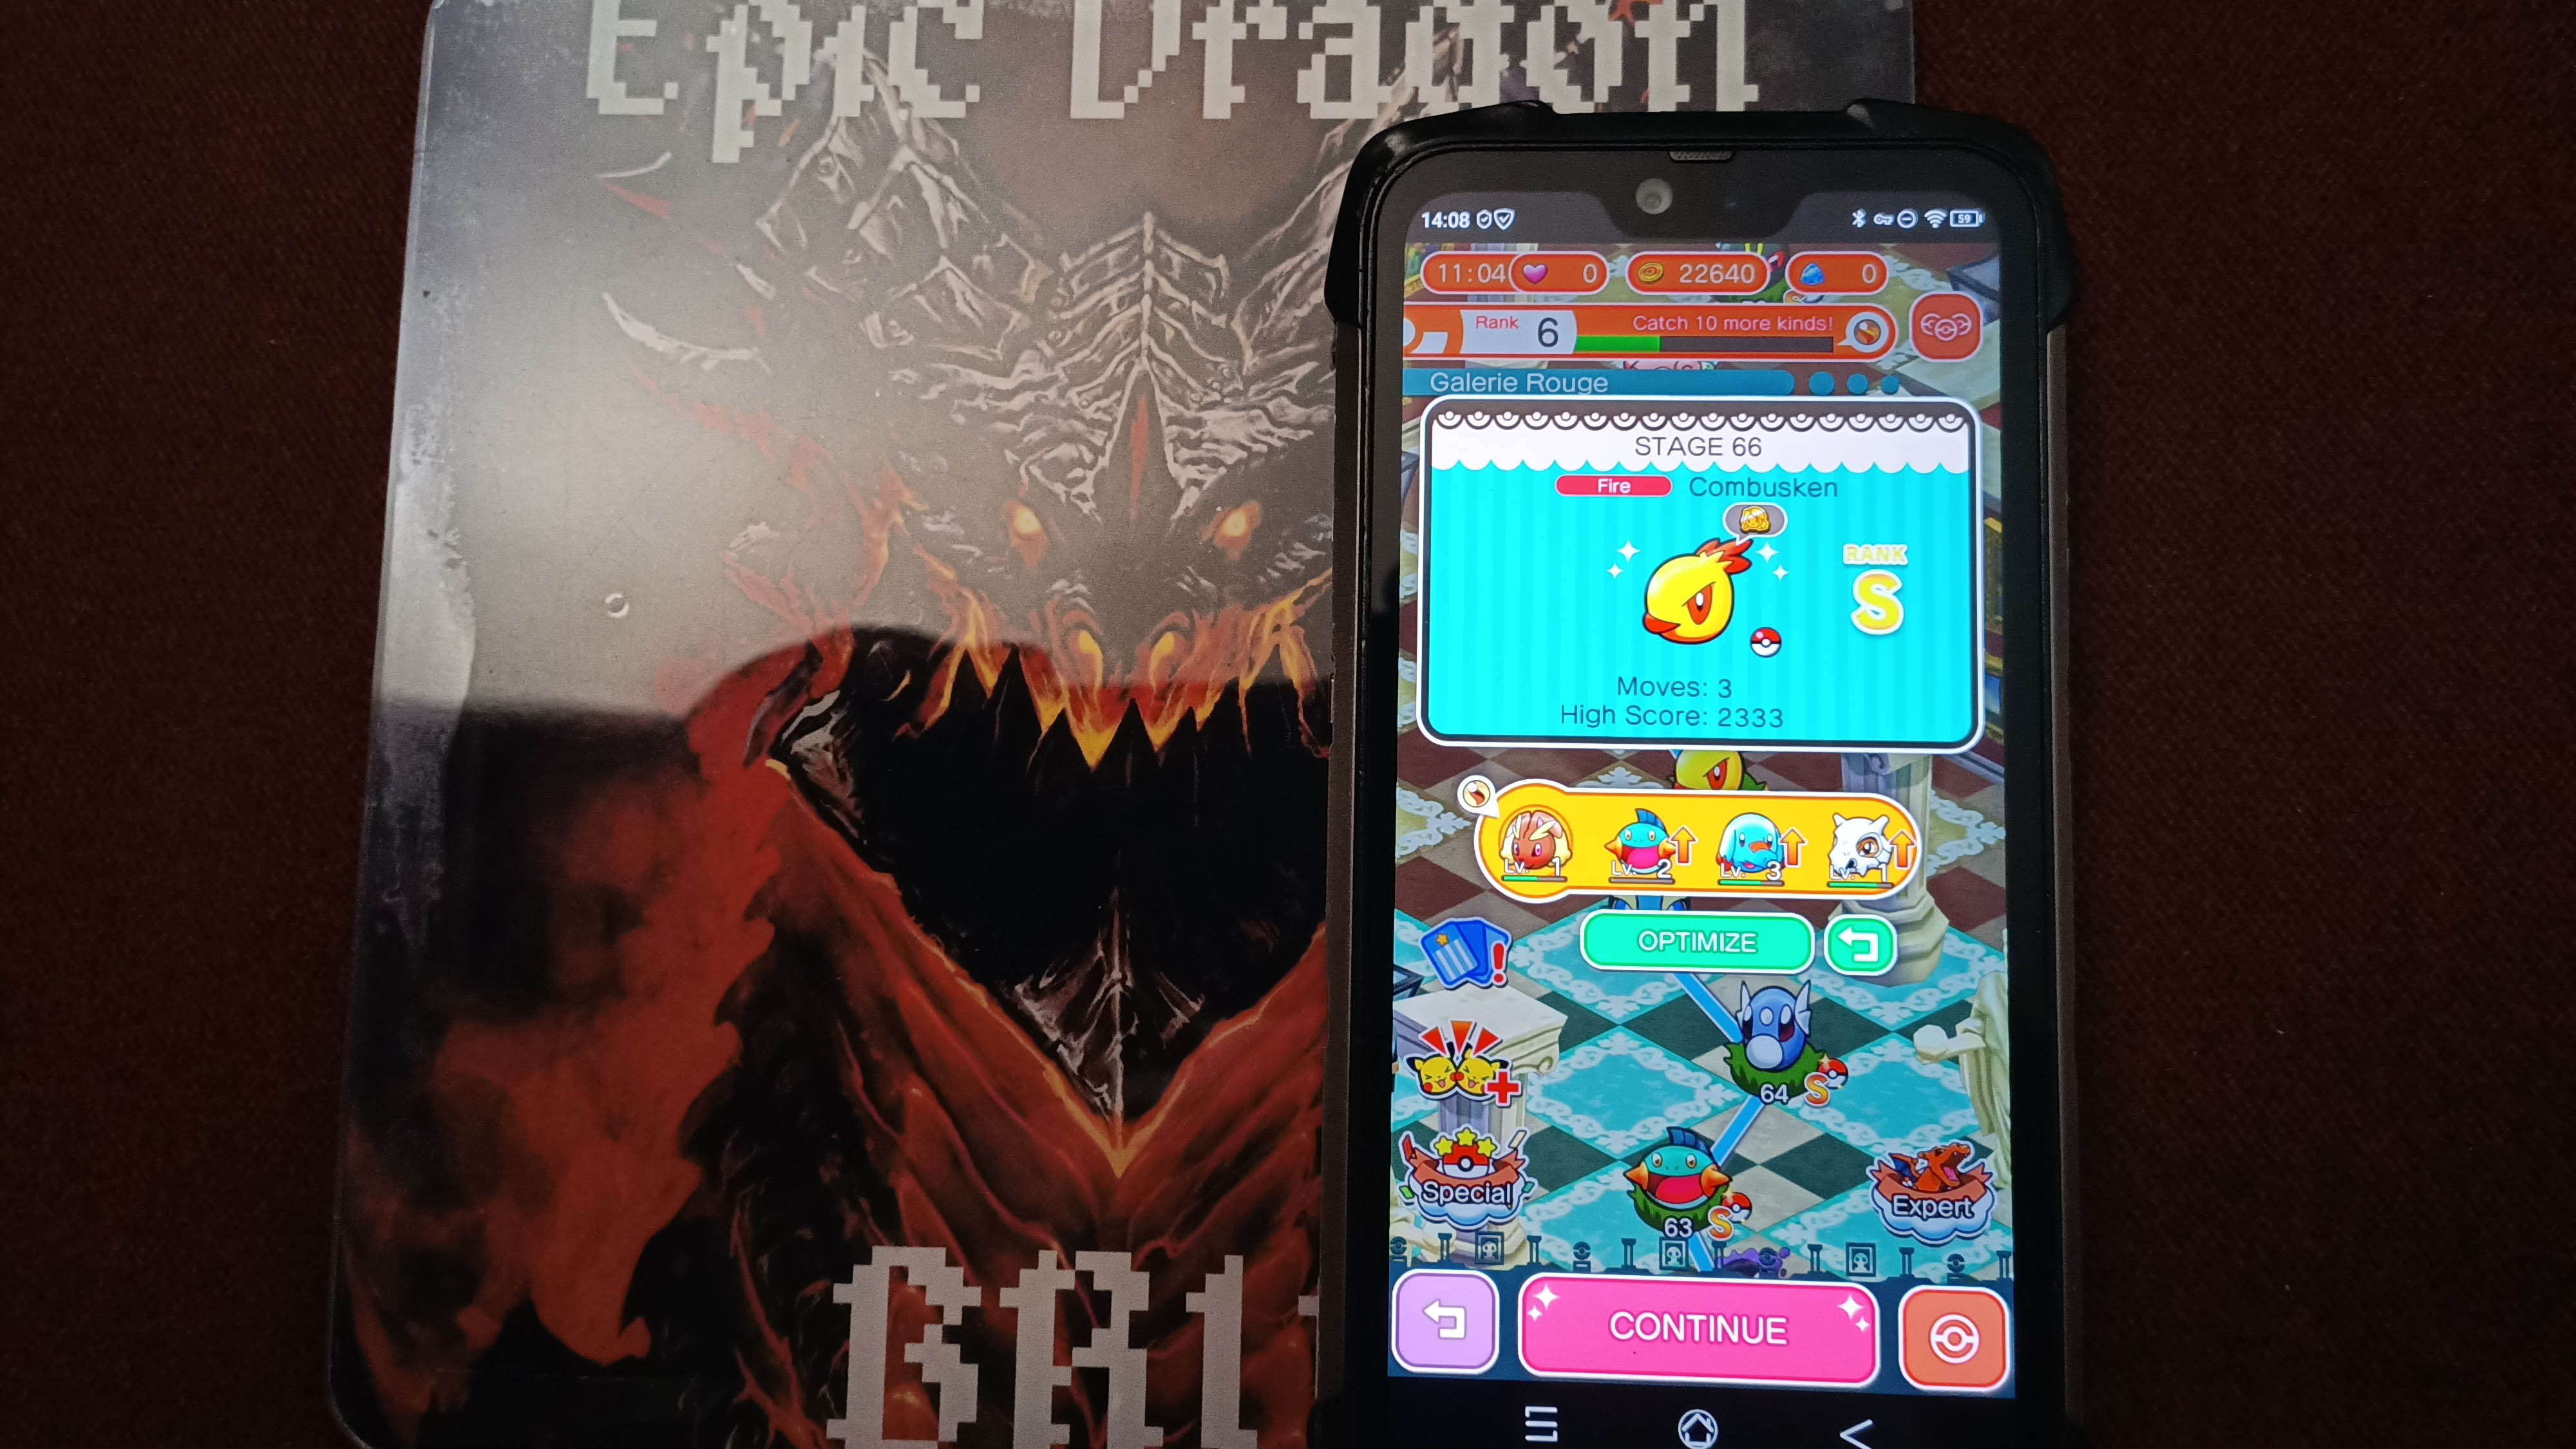 EpicDragon: Pokemon Shuffle Mobile: Stage 066 (Android) 2,333 points on 2022-09-16 16:44:35